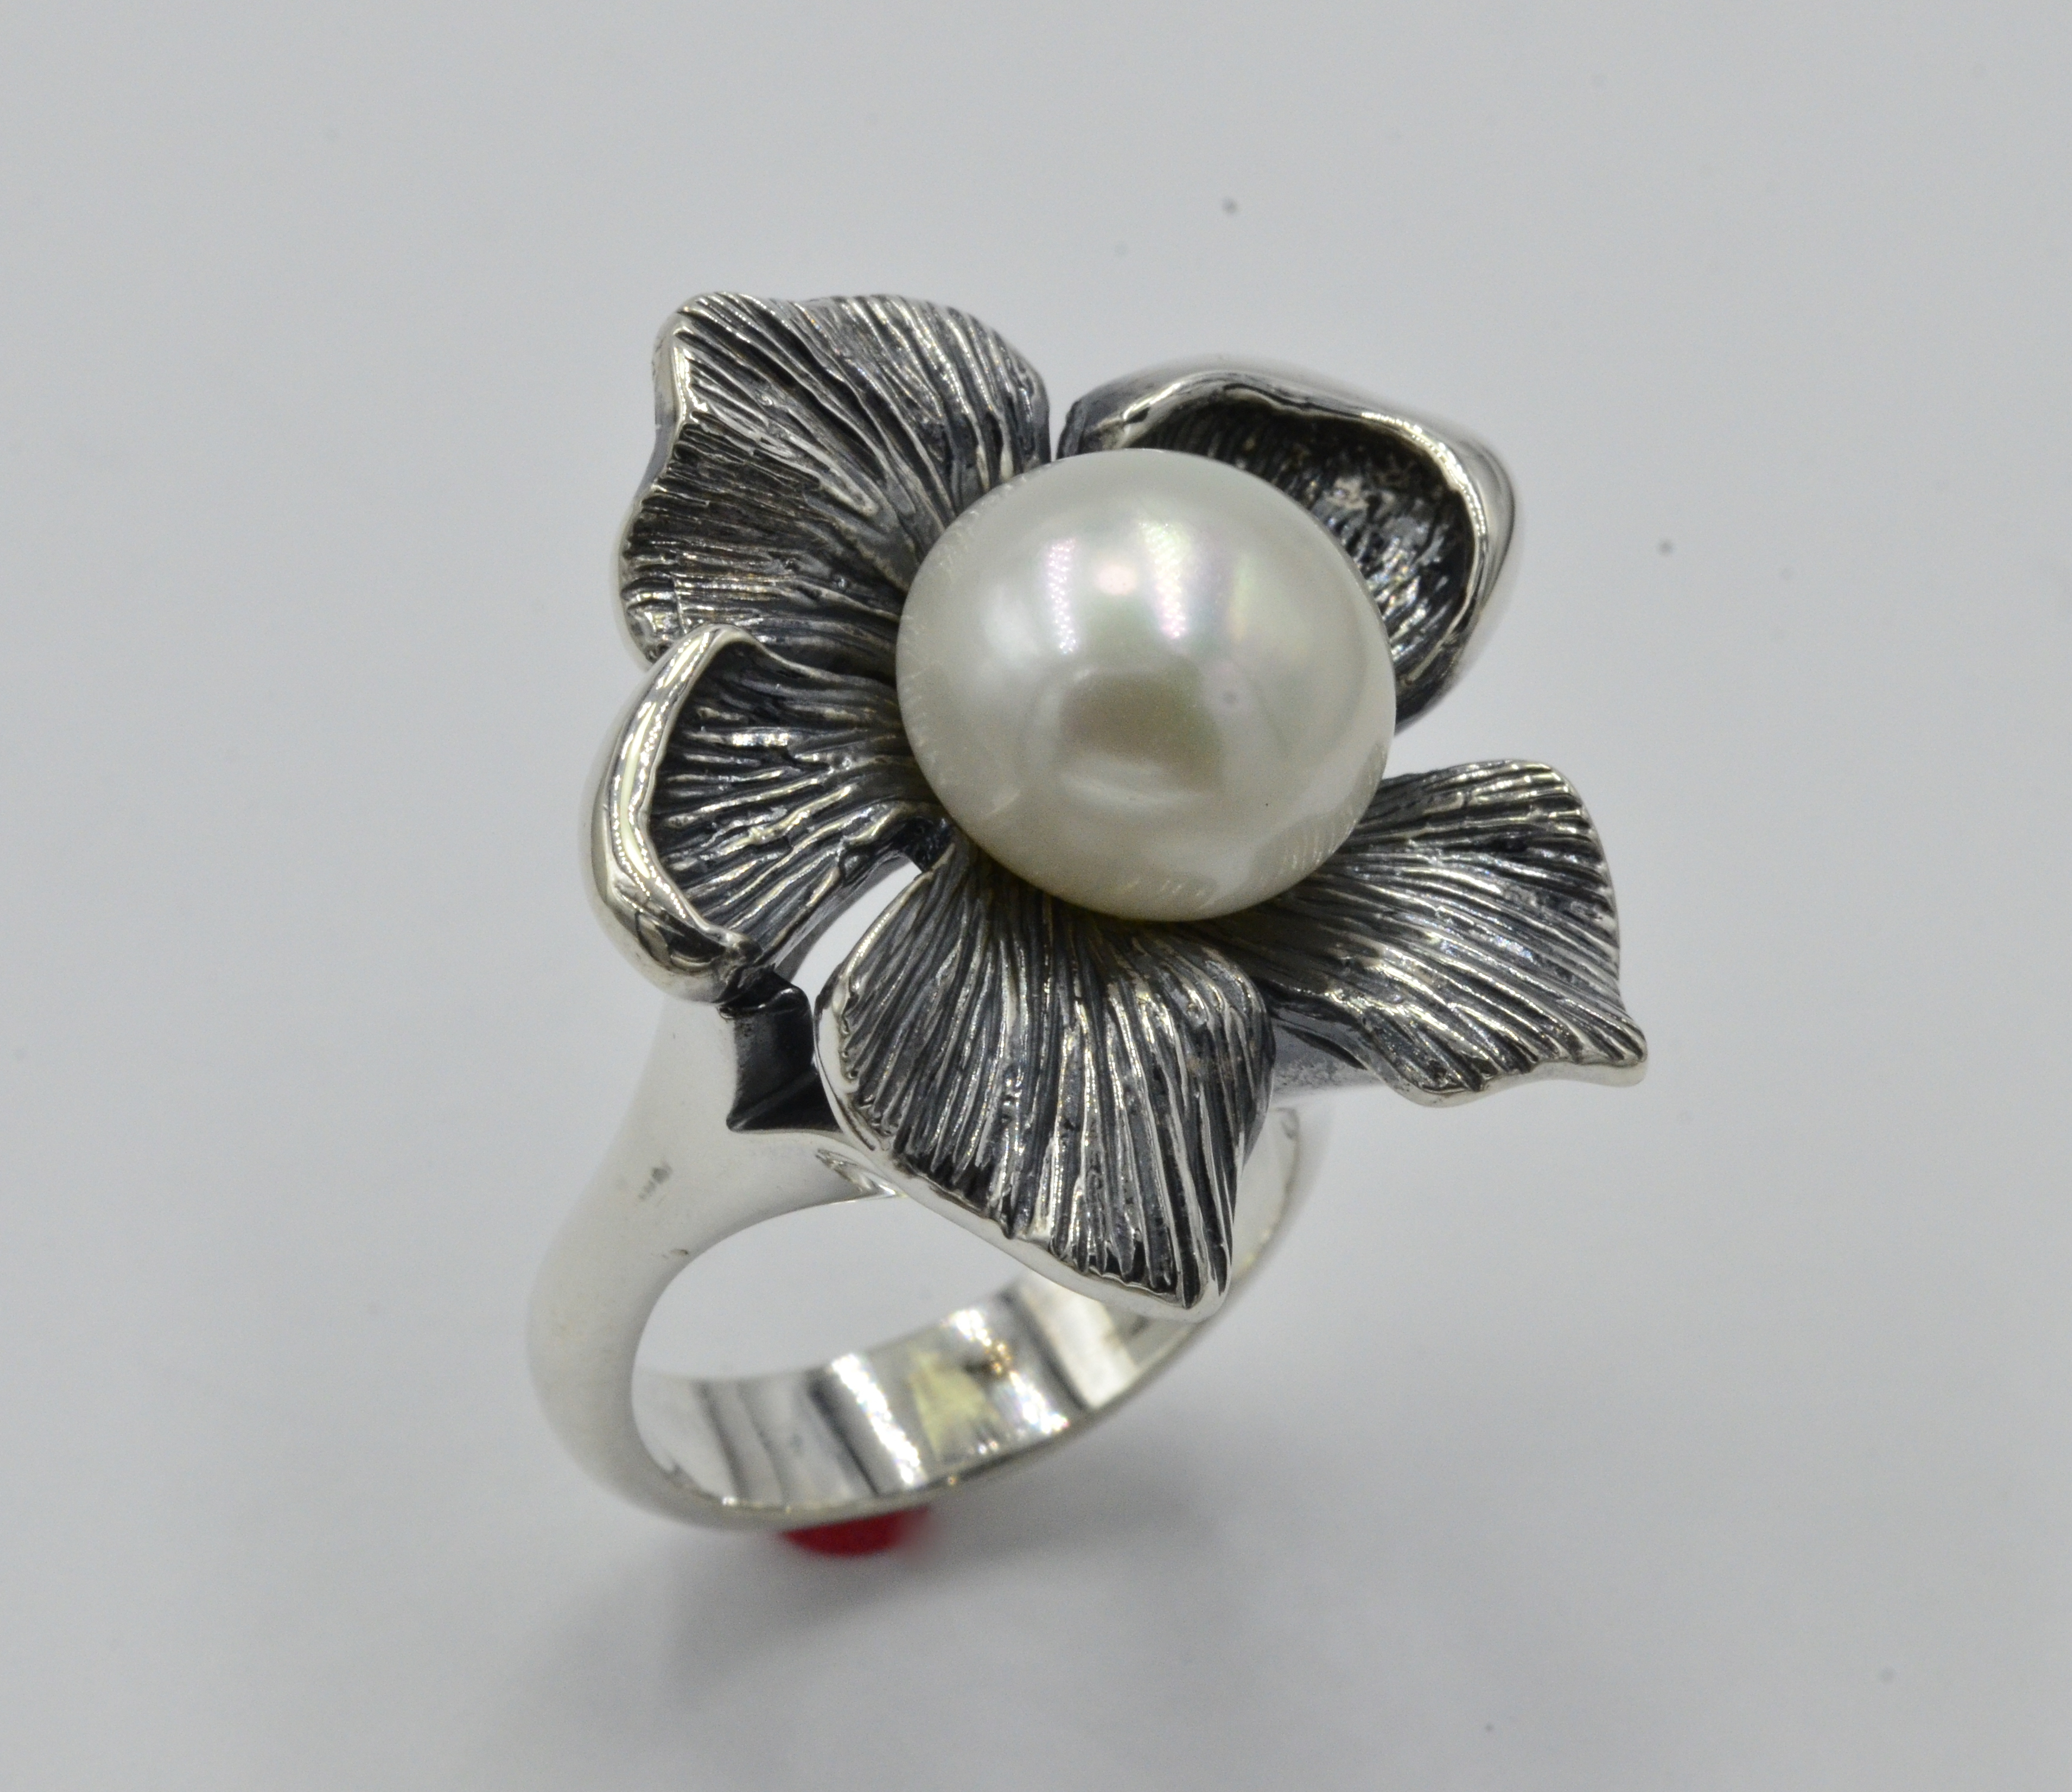 Hand crafted abstract Flower ring. Very popular gift that girlfriends chip in on when one of the girls has a special birthday.